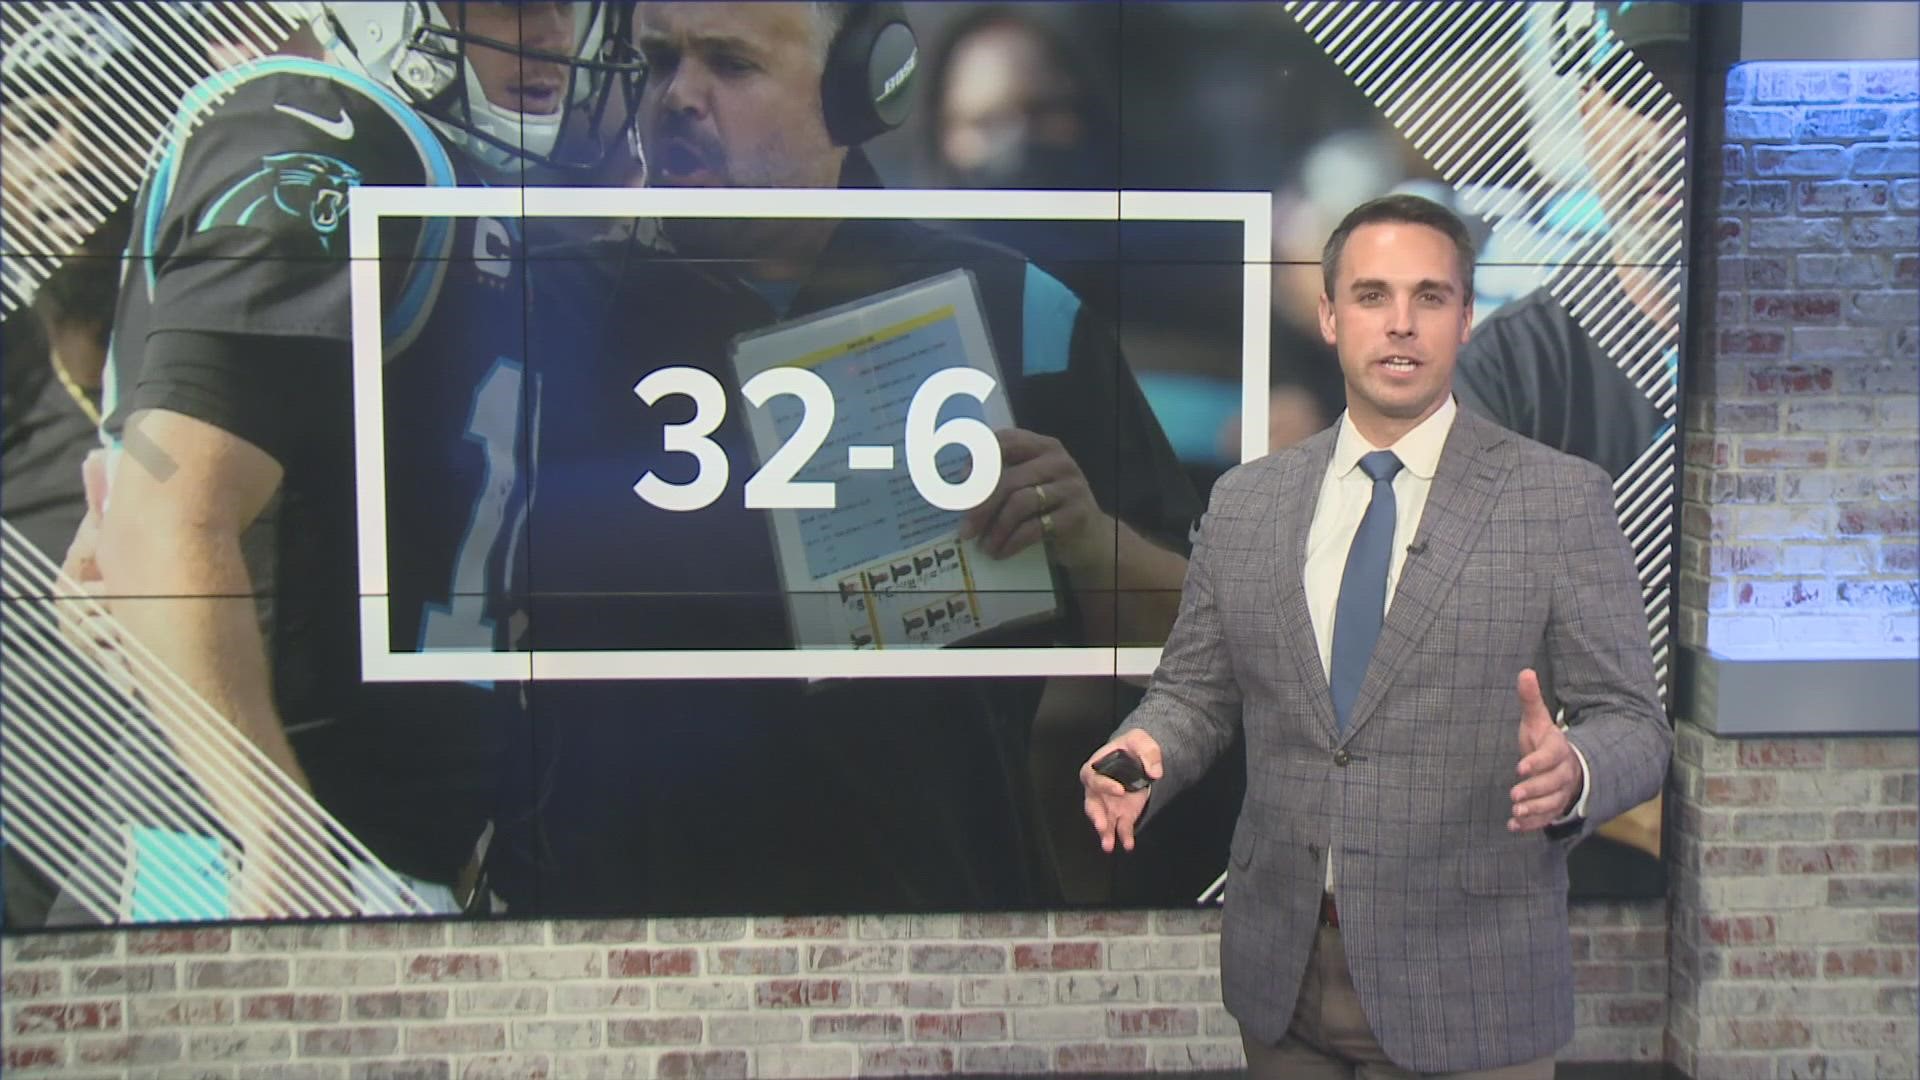 WCNC Charlotte's Nick Carboni talks with Julian Council, host of the Locked On Panthers Podcast, about Matt Rhule, Cam Newton & Sam Darnold after Carolina's loss.